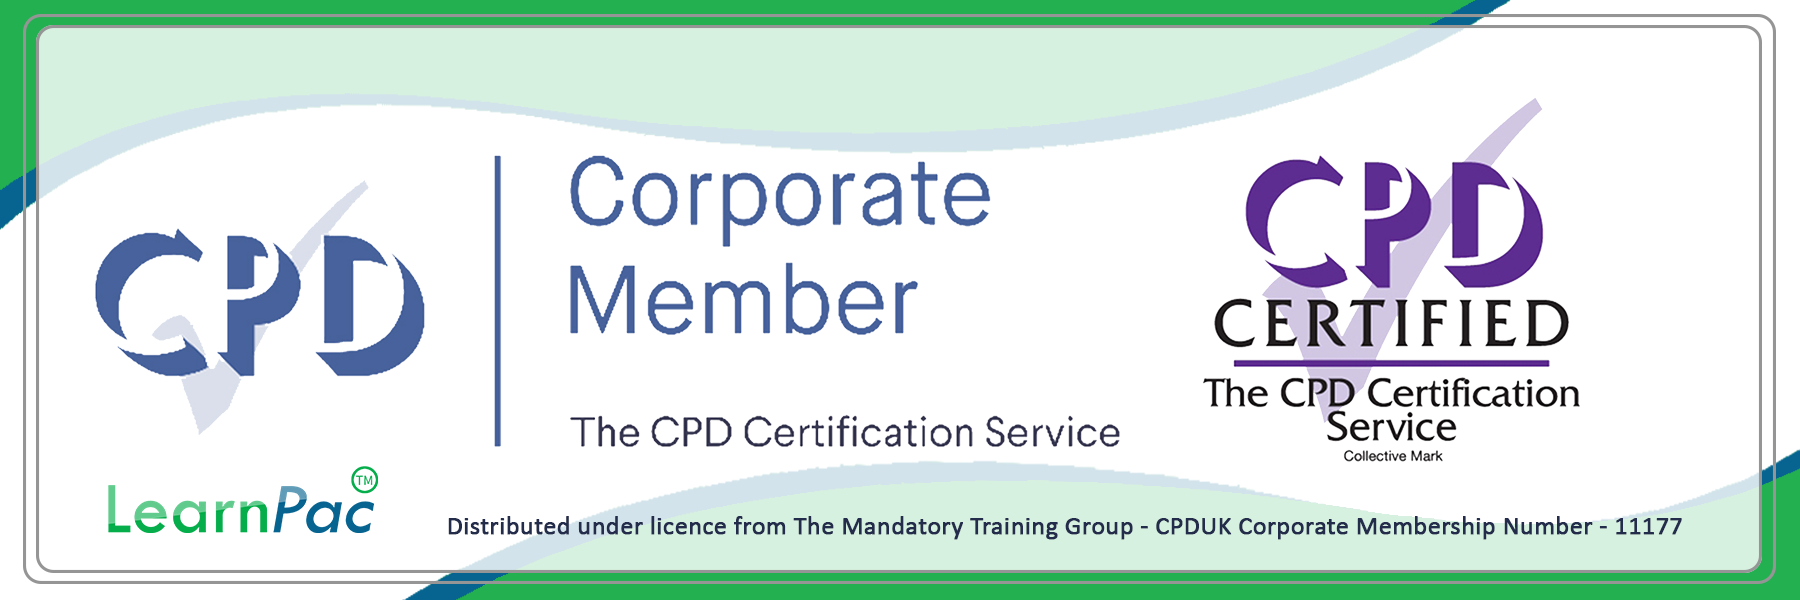 NHS Mandatory Training - E-Learning Courses with Certificates - CPD Certified - LearnPac Systems UK -